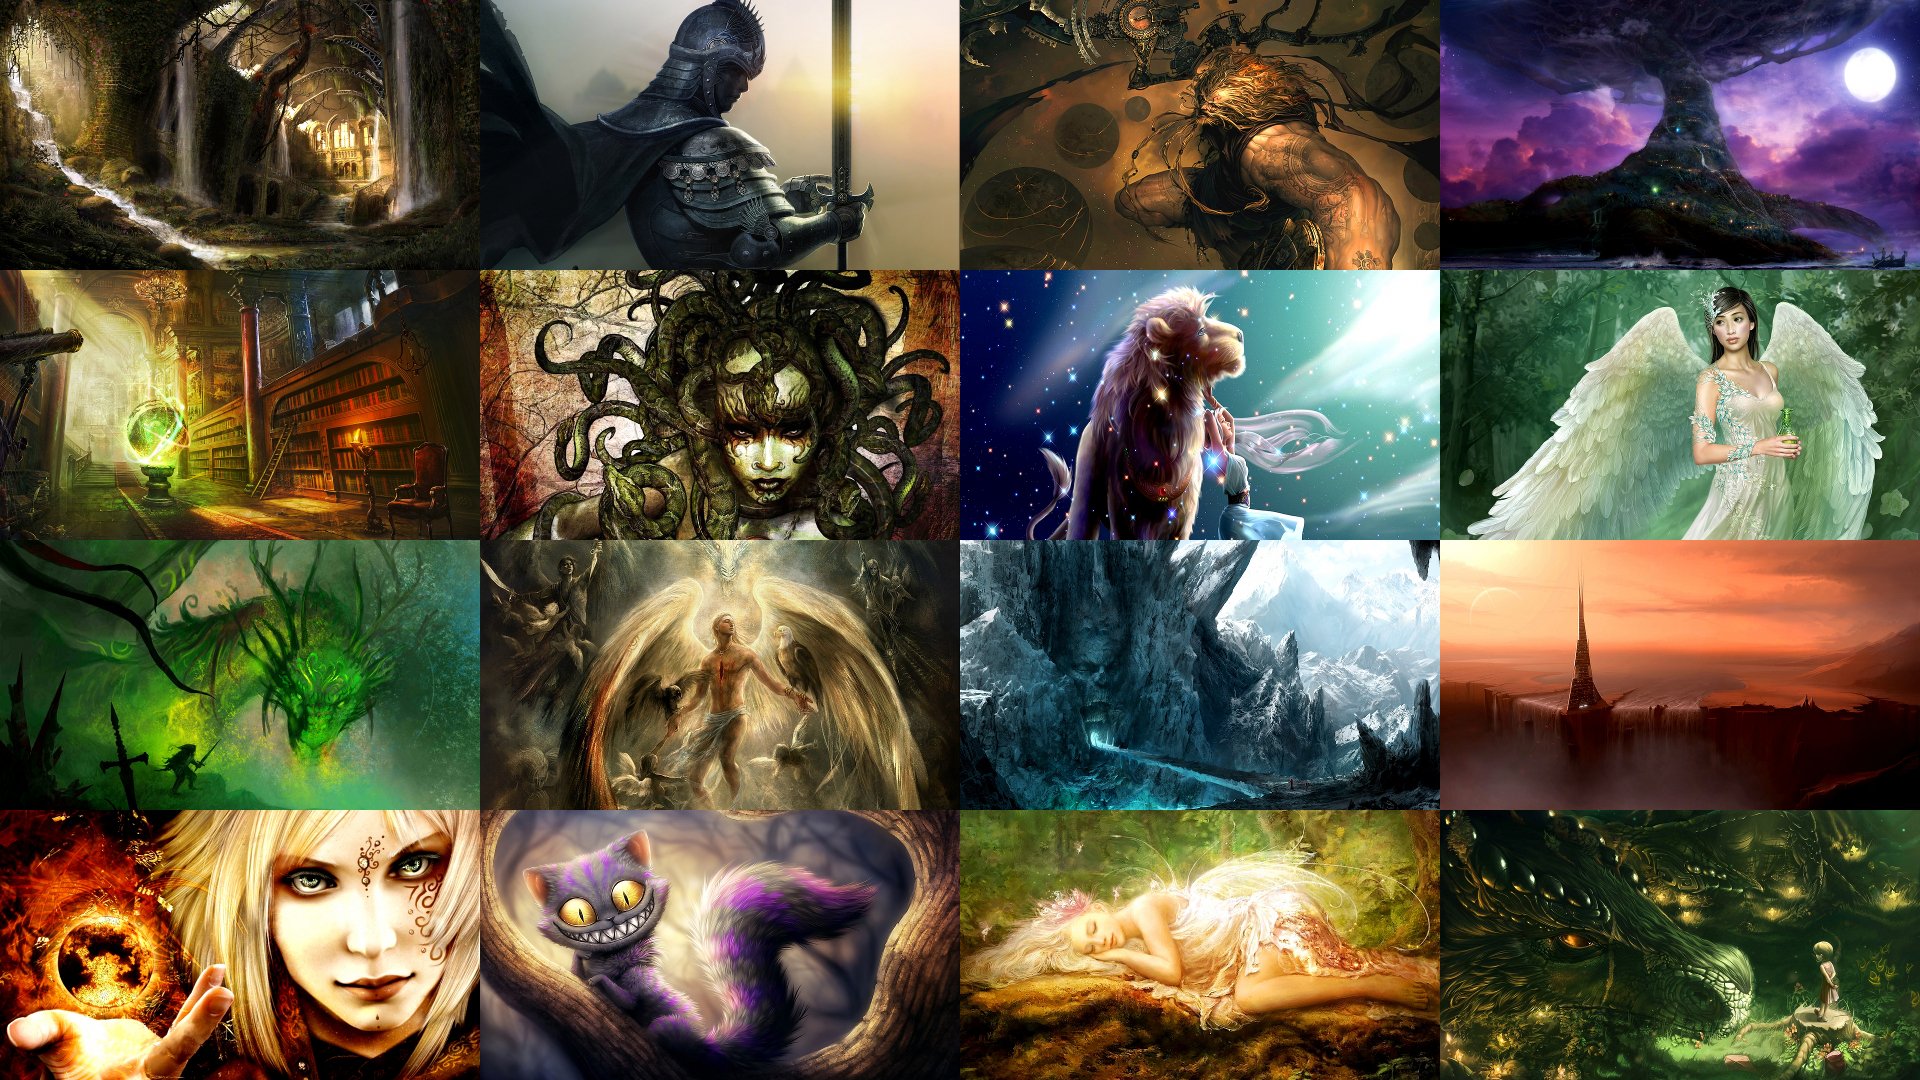 Download Fantasy wallpapers for mobile phone free Fantasy HD pictures